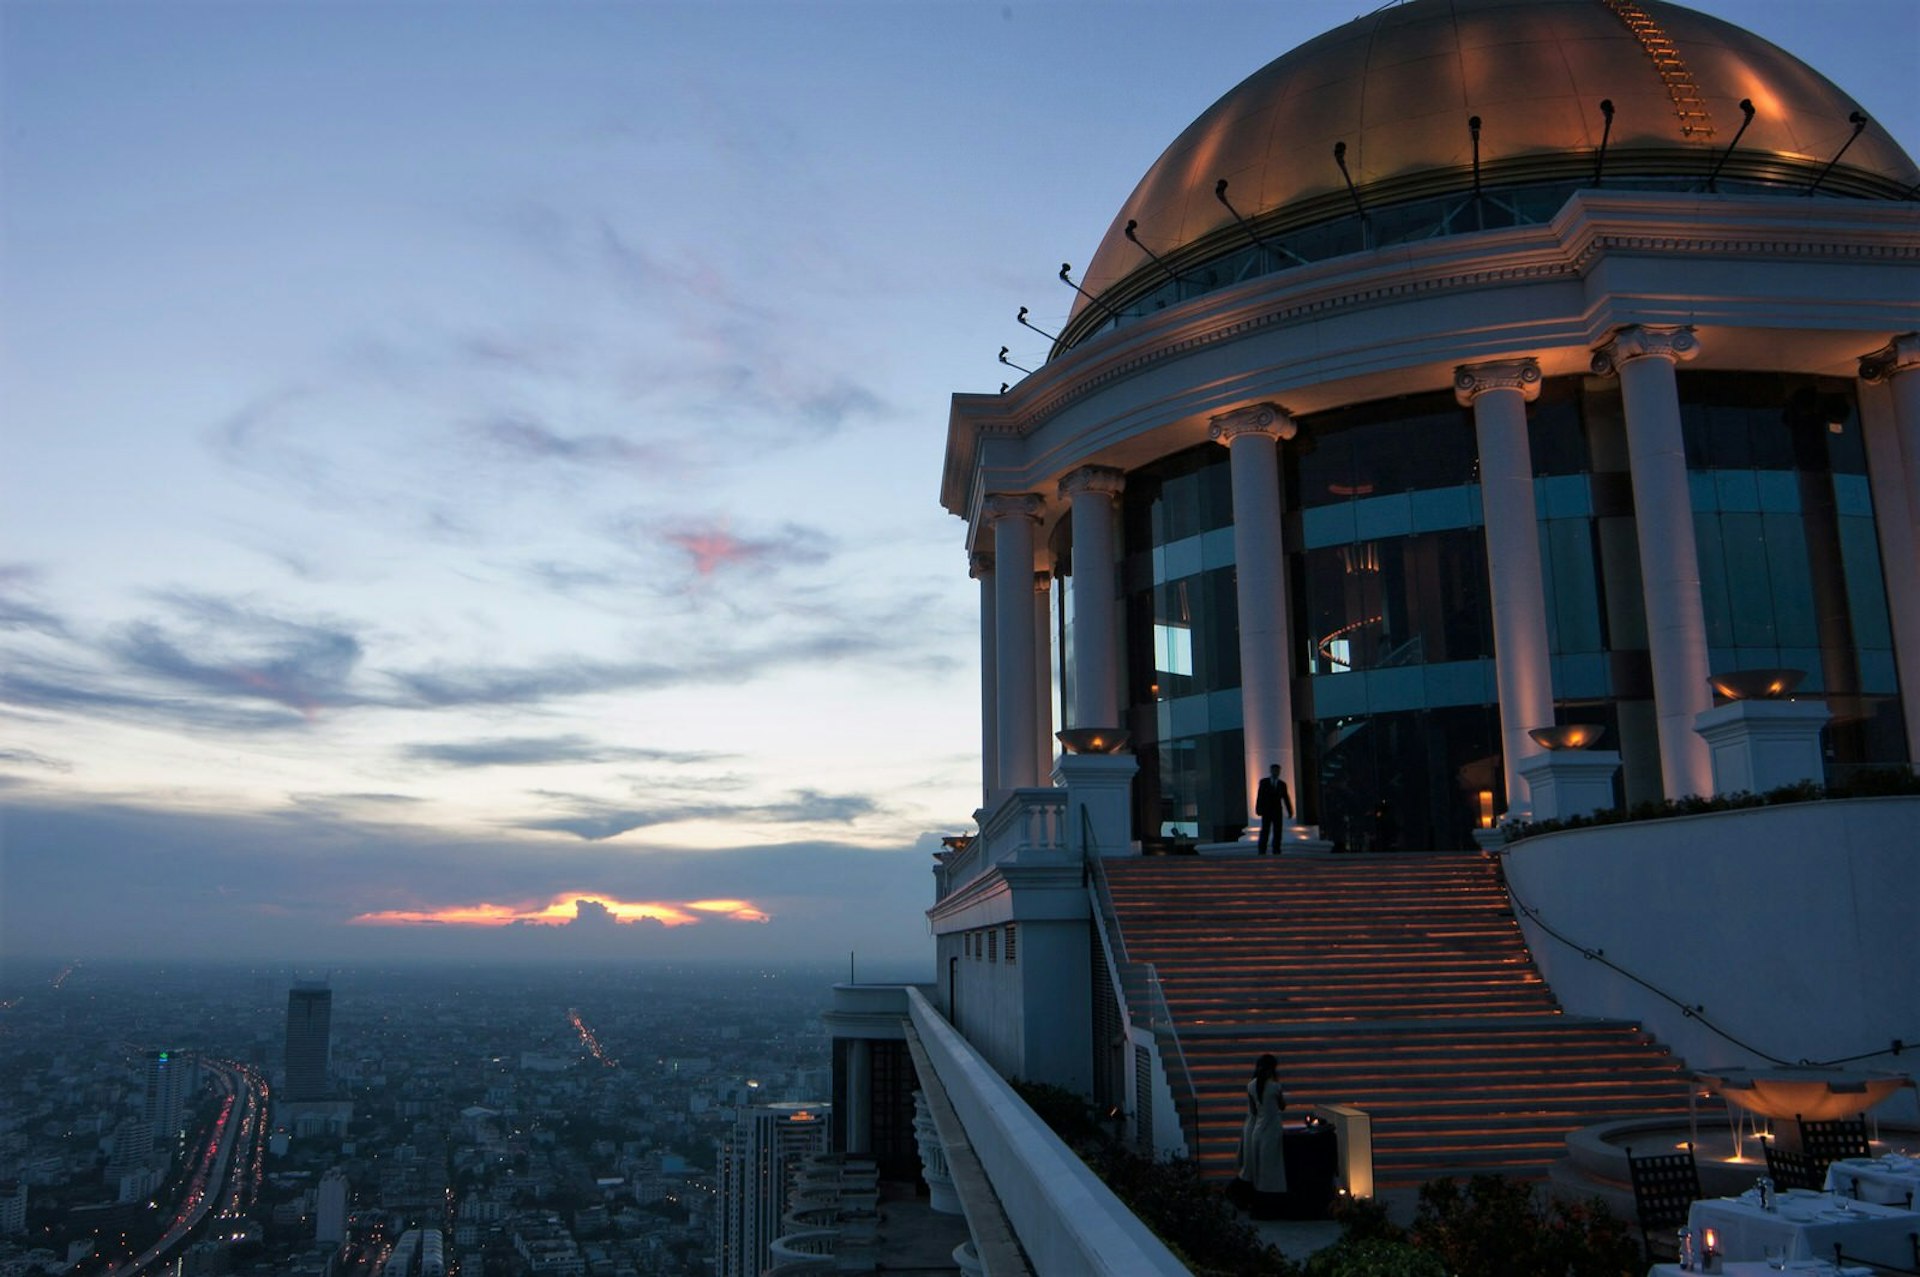 View at dusk of the Sky Bar staircase,, jutting out over the city © Austin Bush / Lonely Planet